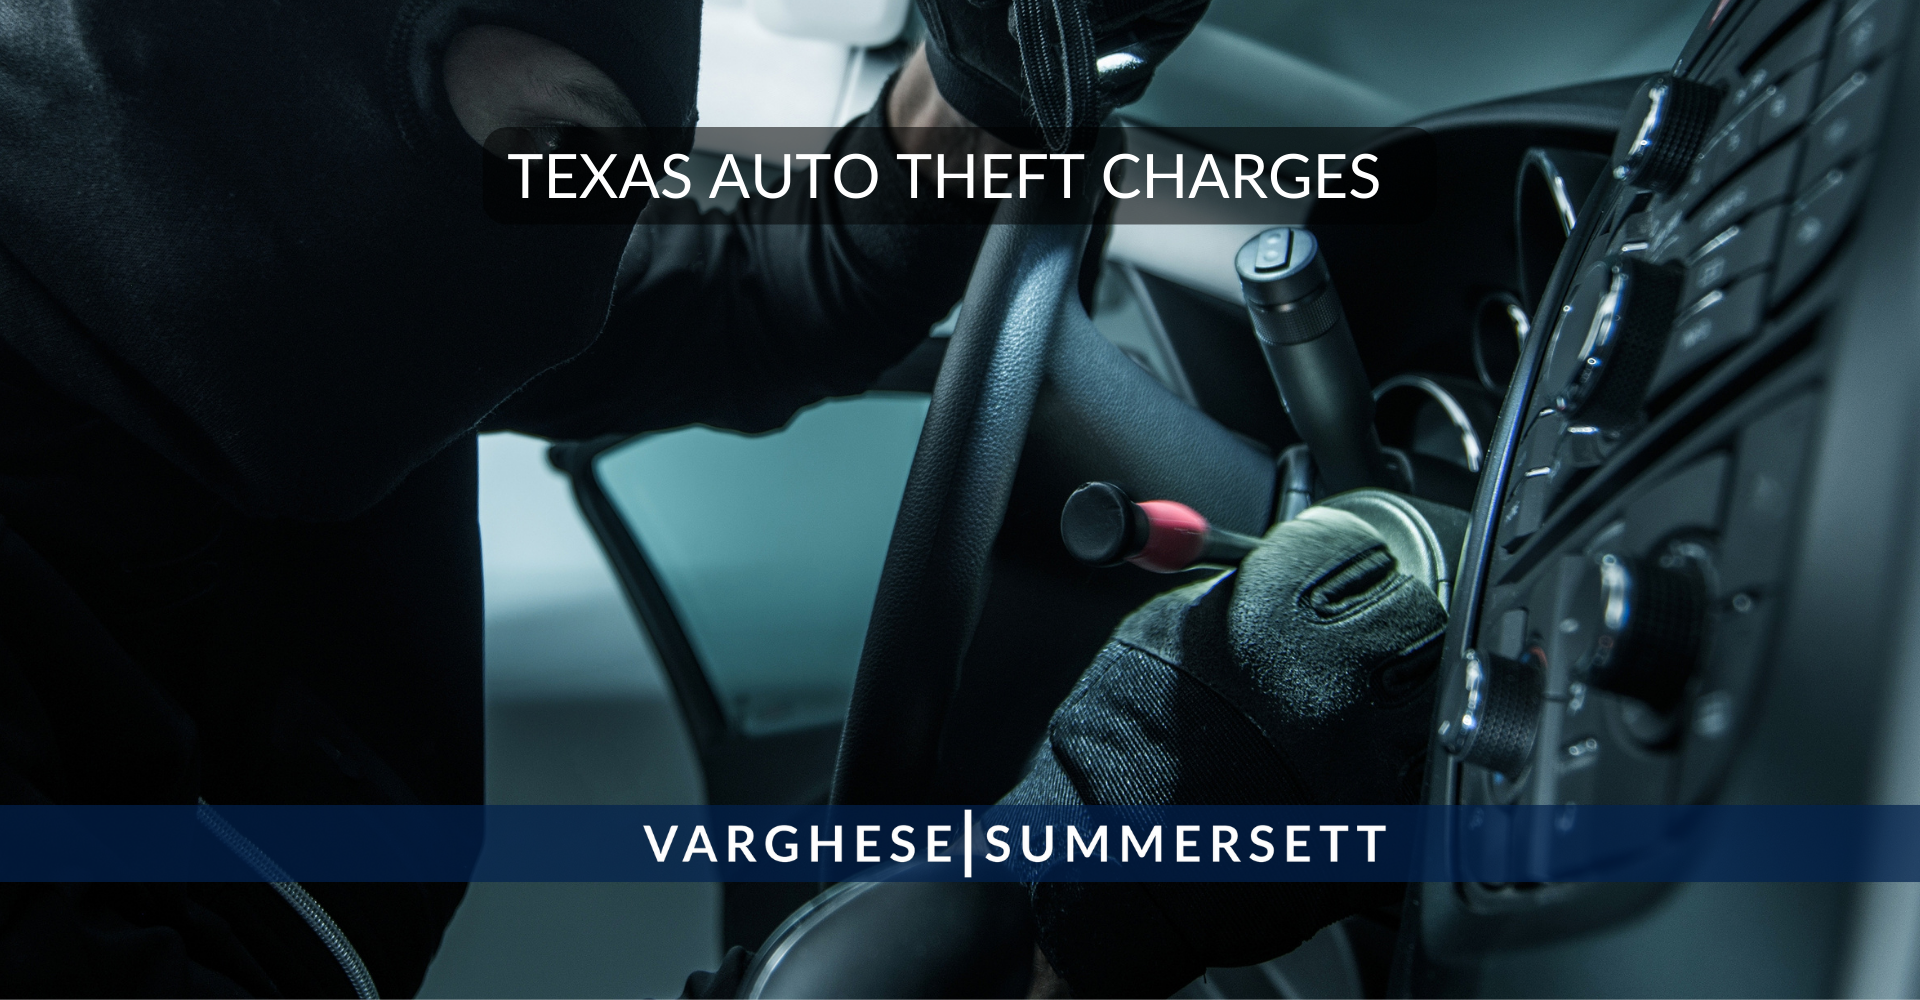 Texas Auto Theft Charges